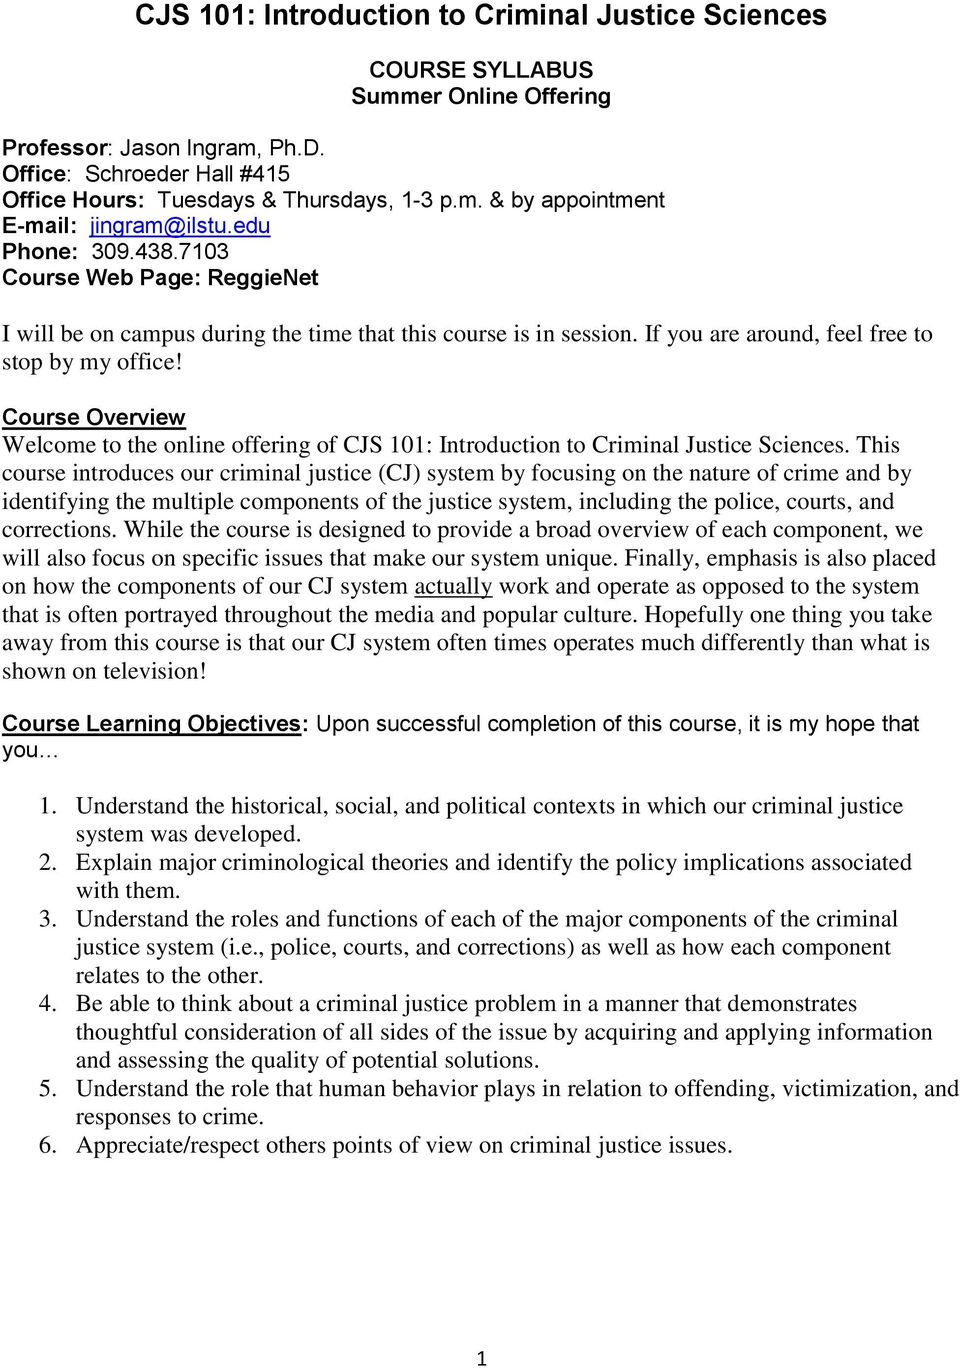 Course Overview Welcome to the online offering of CJS 101: Introduction to Criminal Justice Sciences.